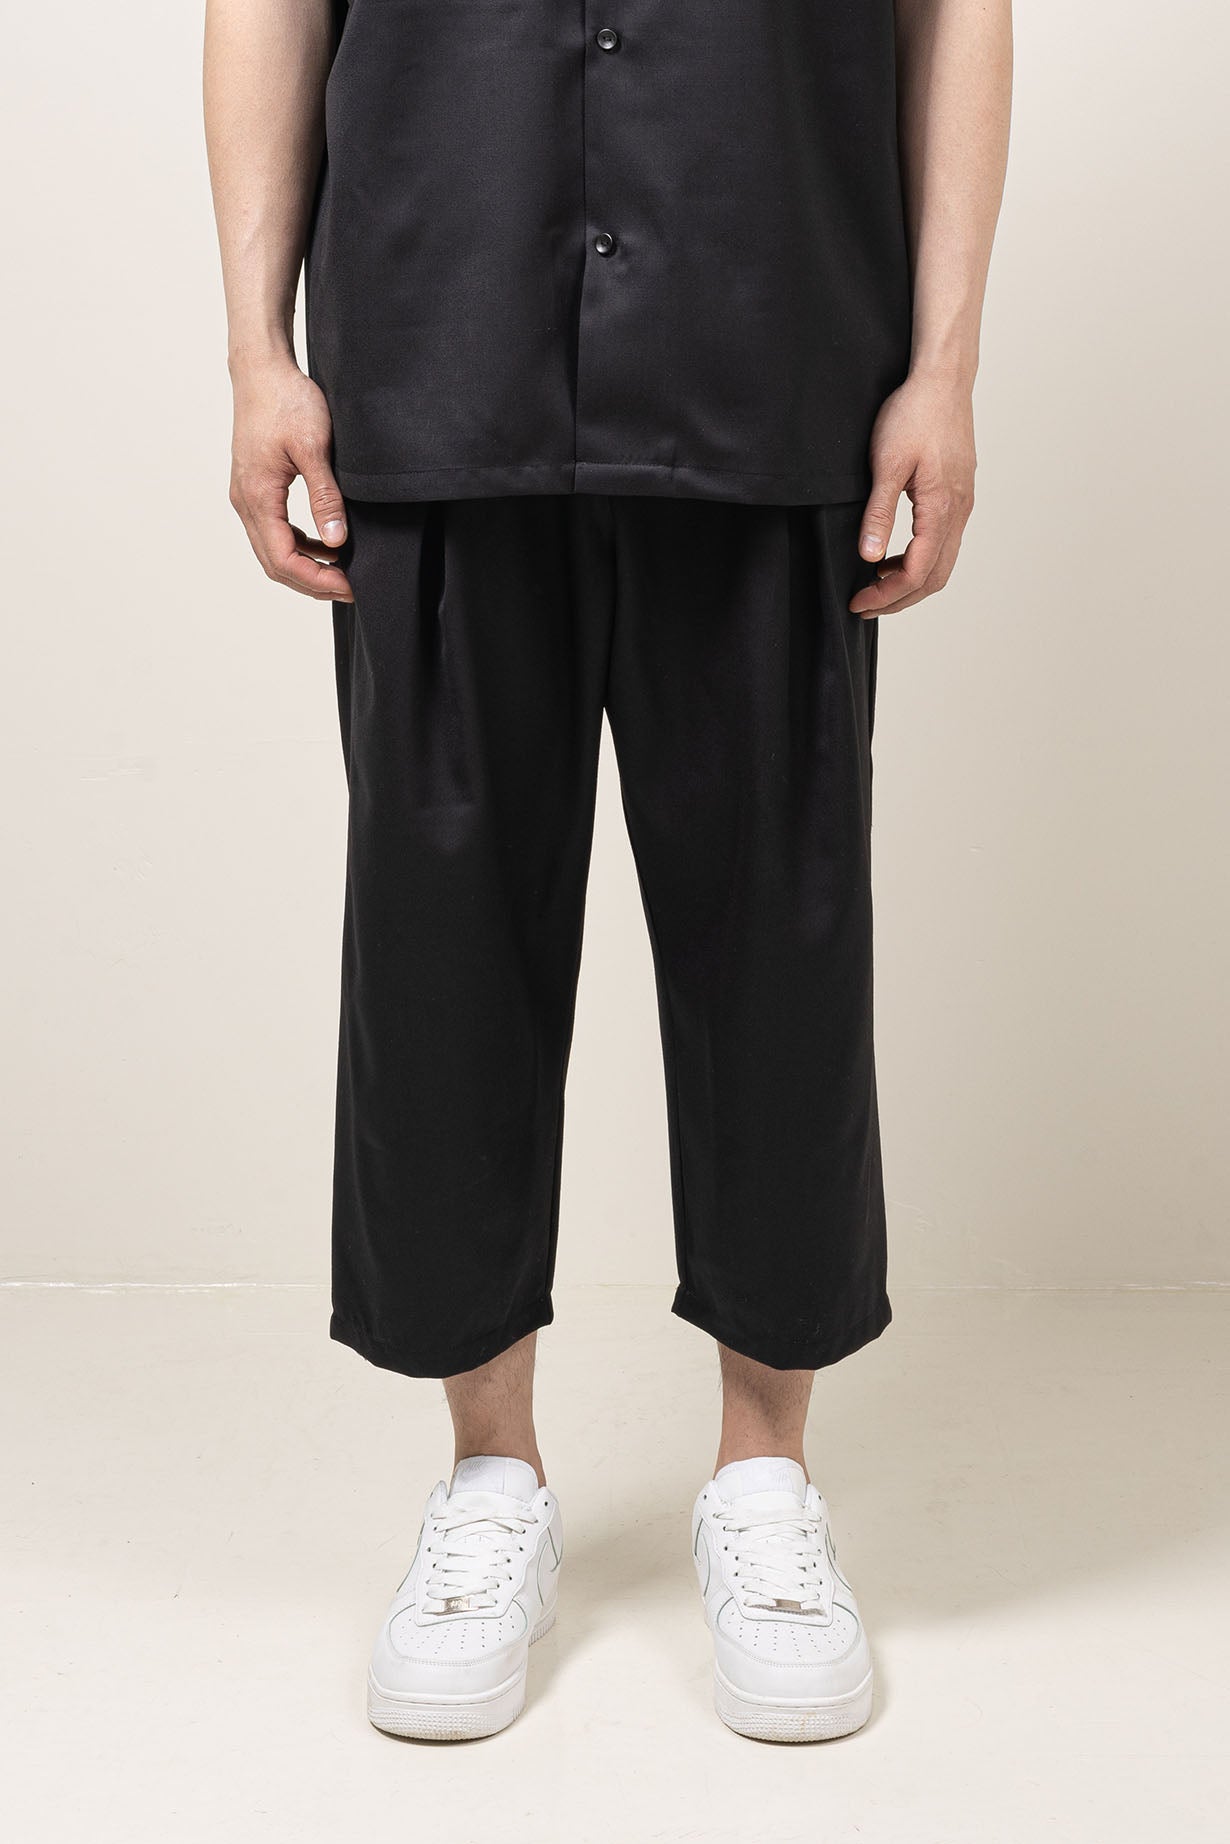 Straight leg fit mid-rise pants with pocket at the side seams and  pleat details and elastic waistband.